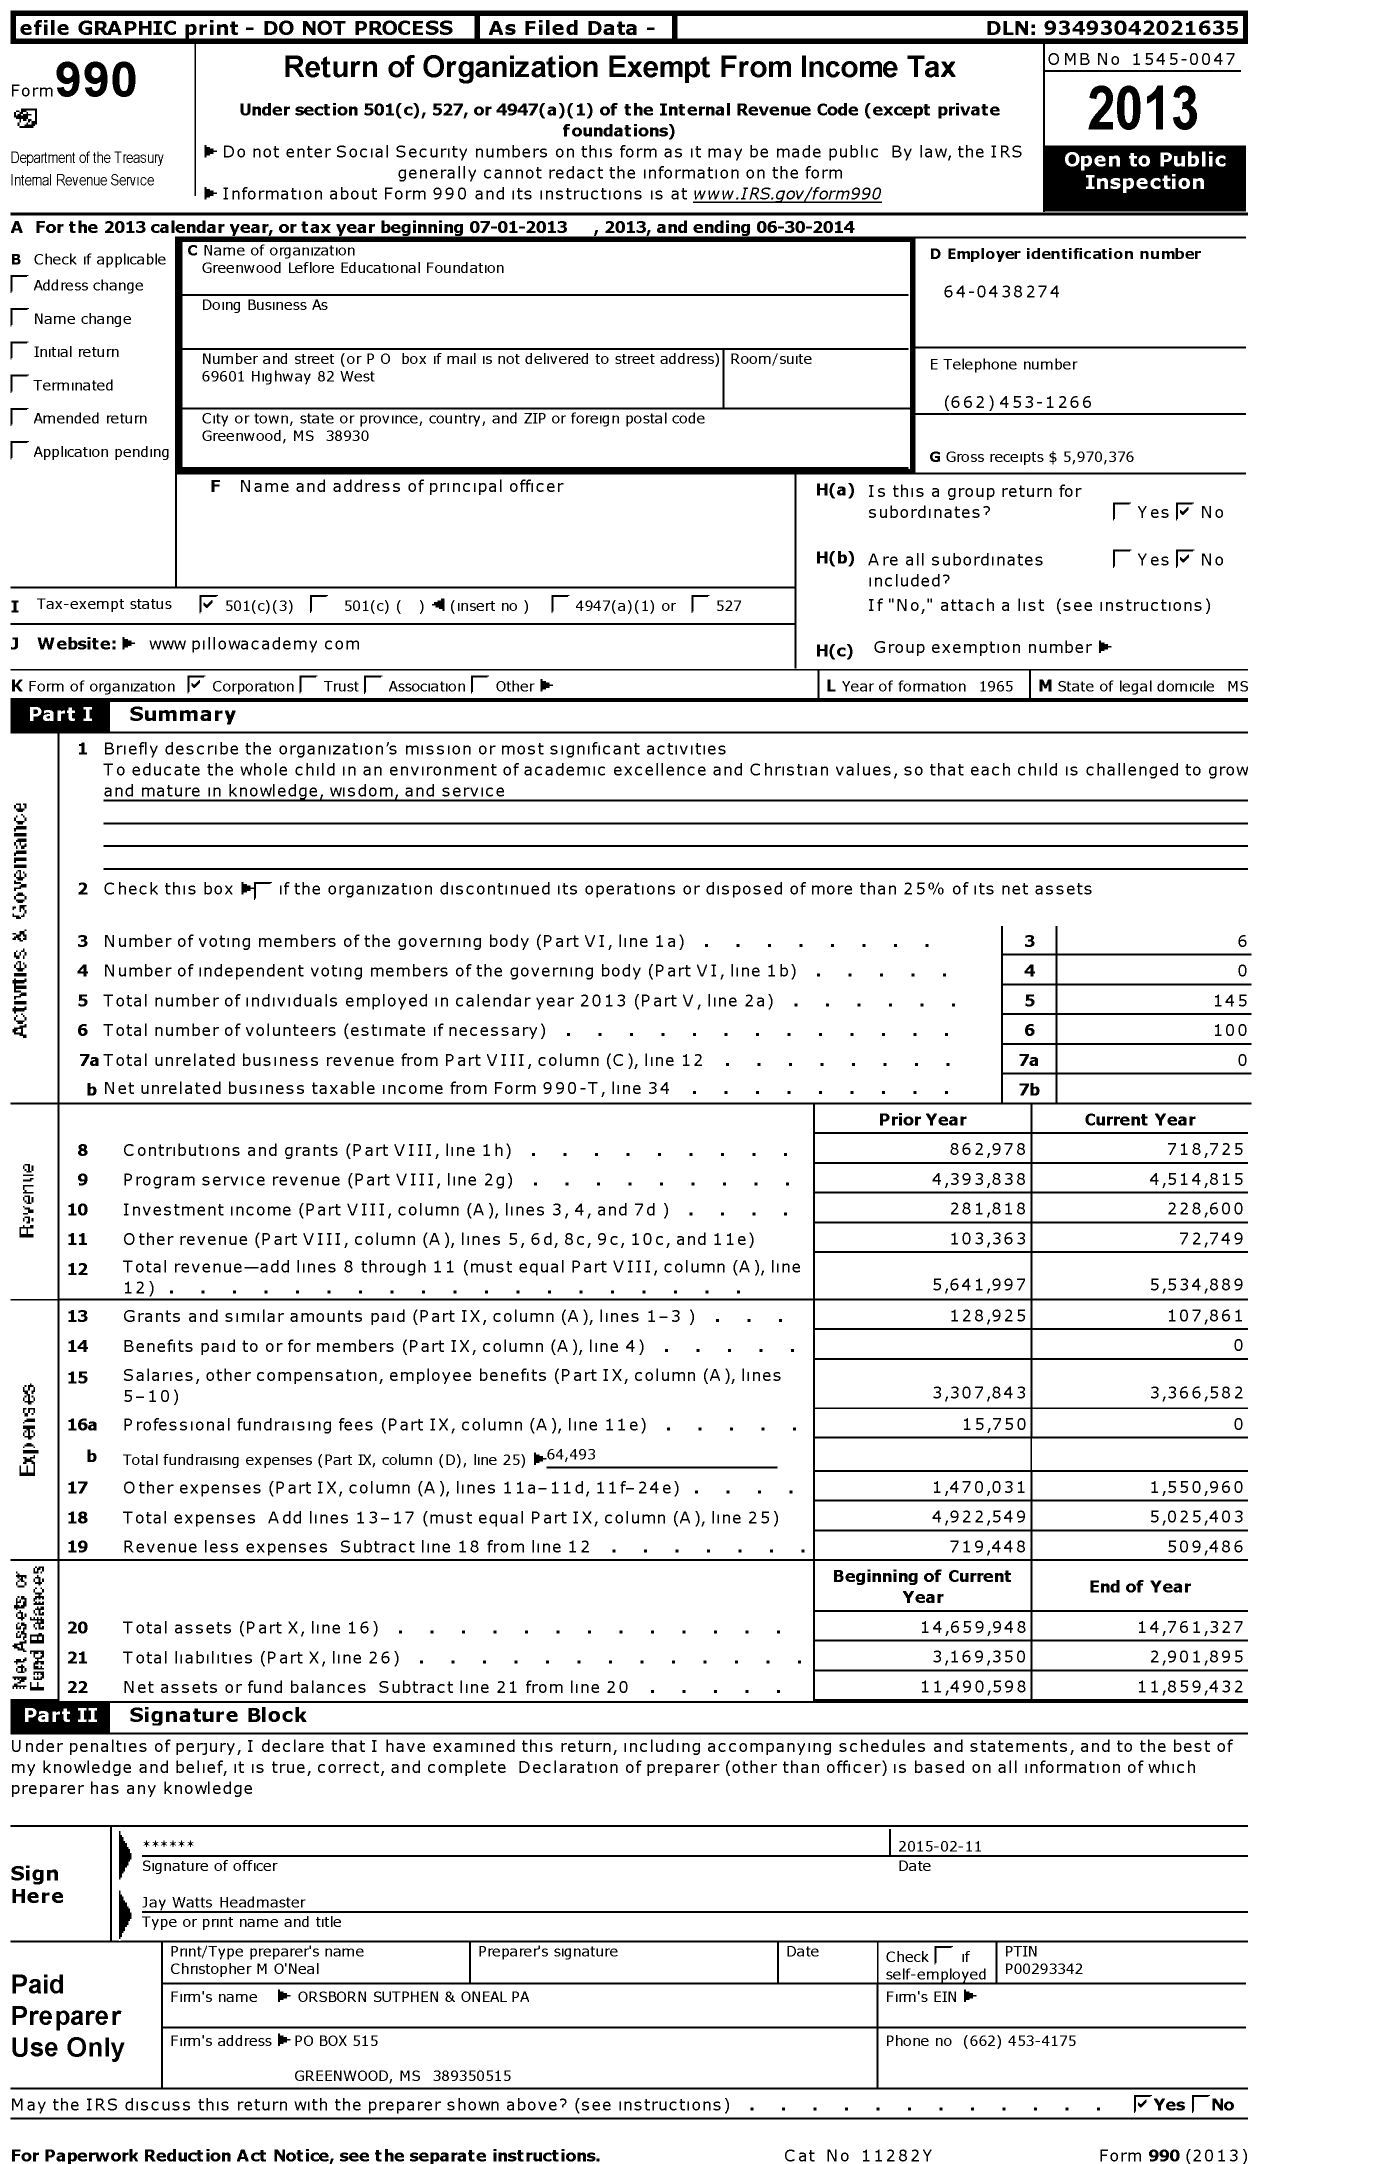 Image of first page of 2013 Form 990 for Greenwood Leflore Educational Foundation